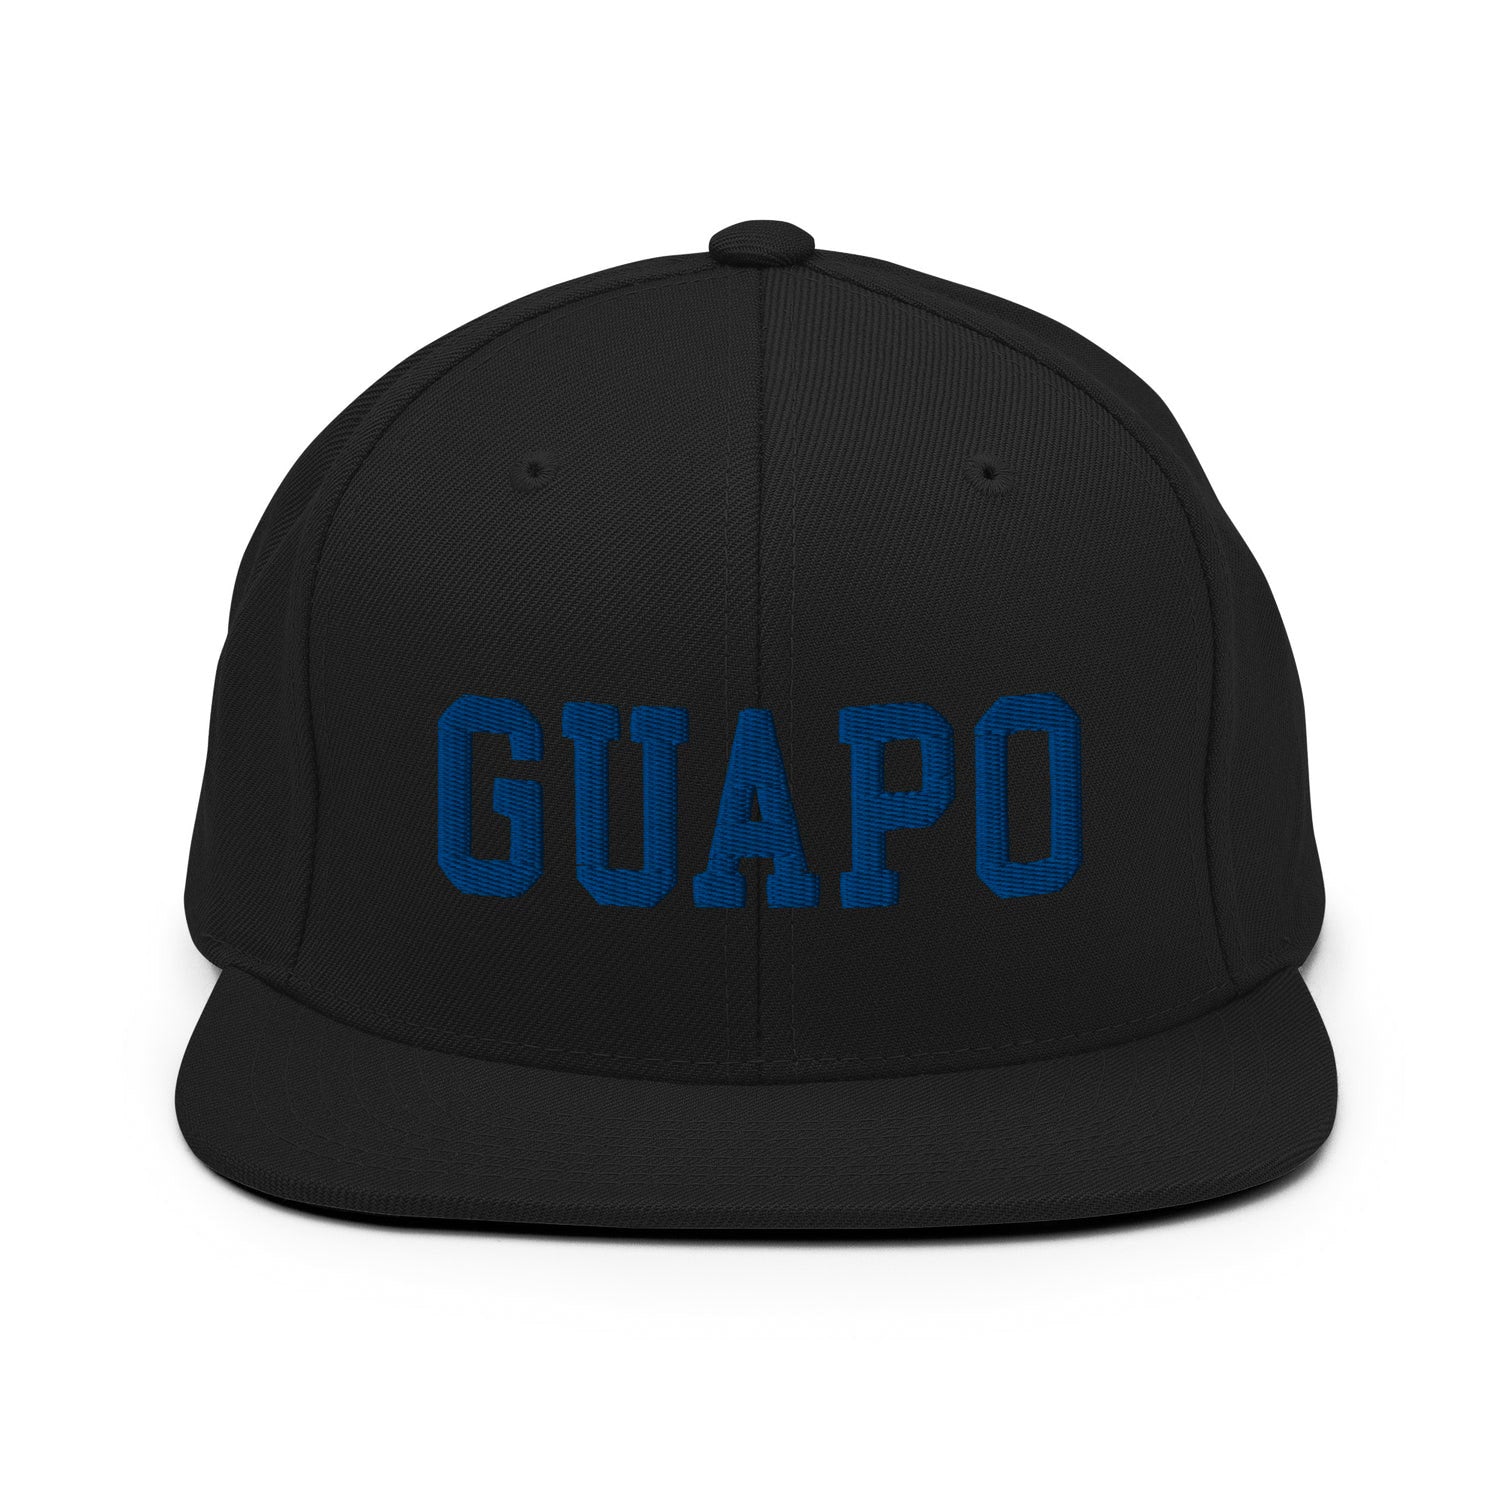 Black OG snapback cap baseball hat with embroidered blue letters that say, "GUAPO"